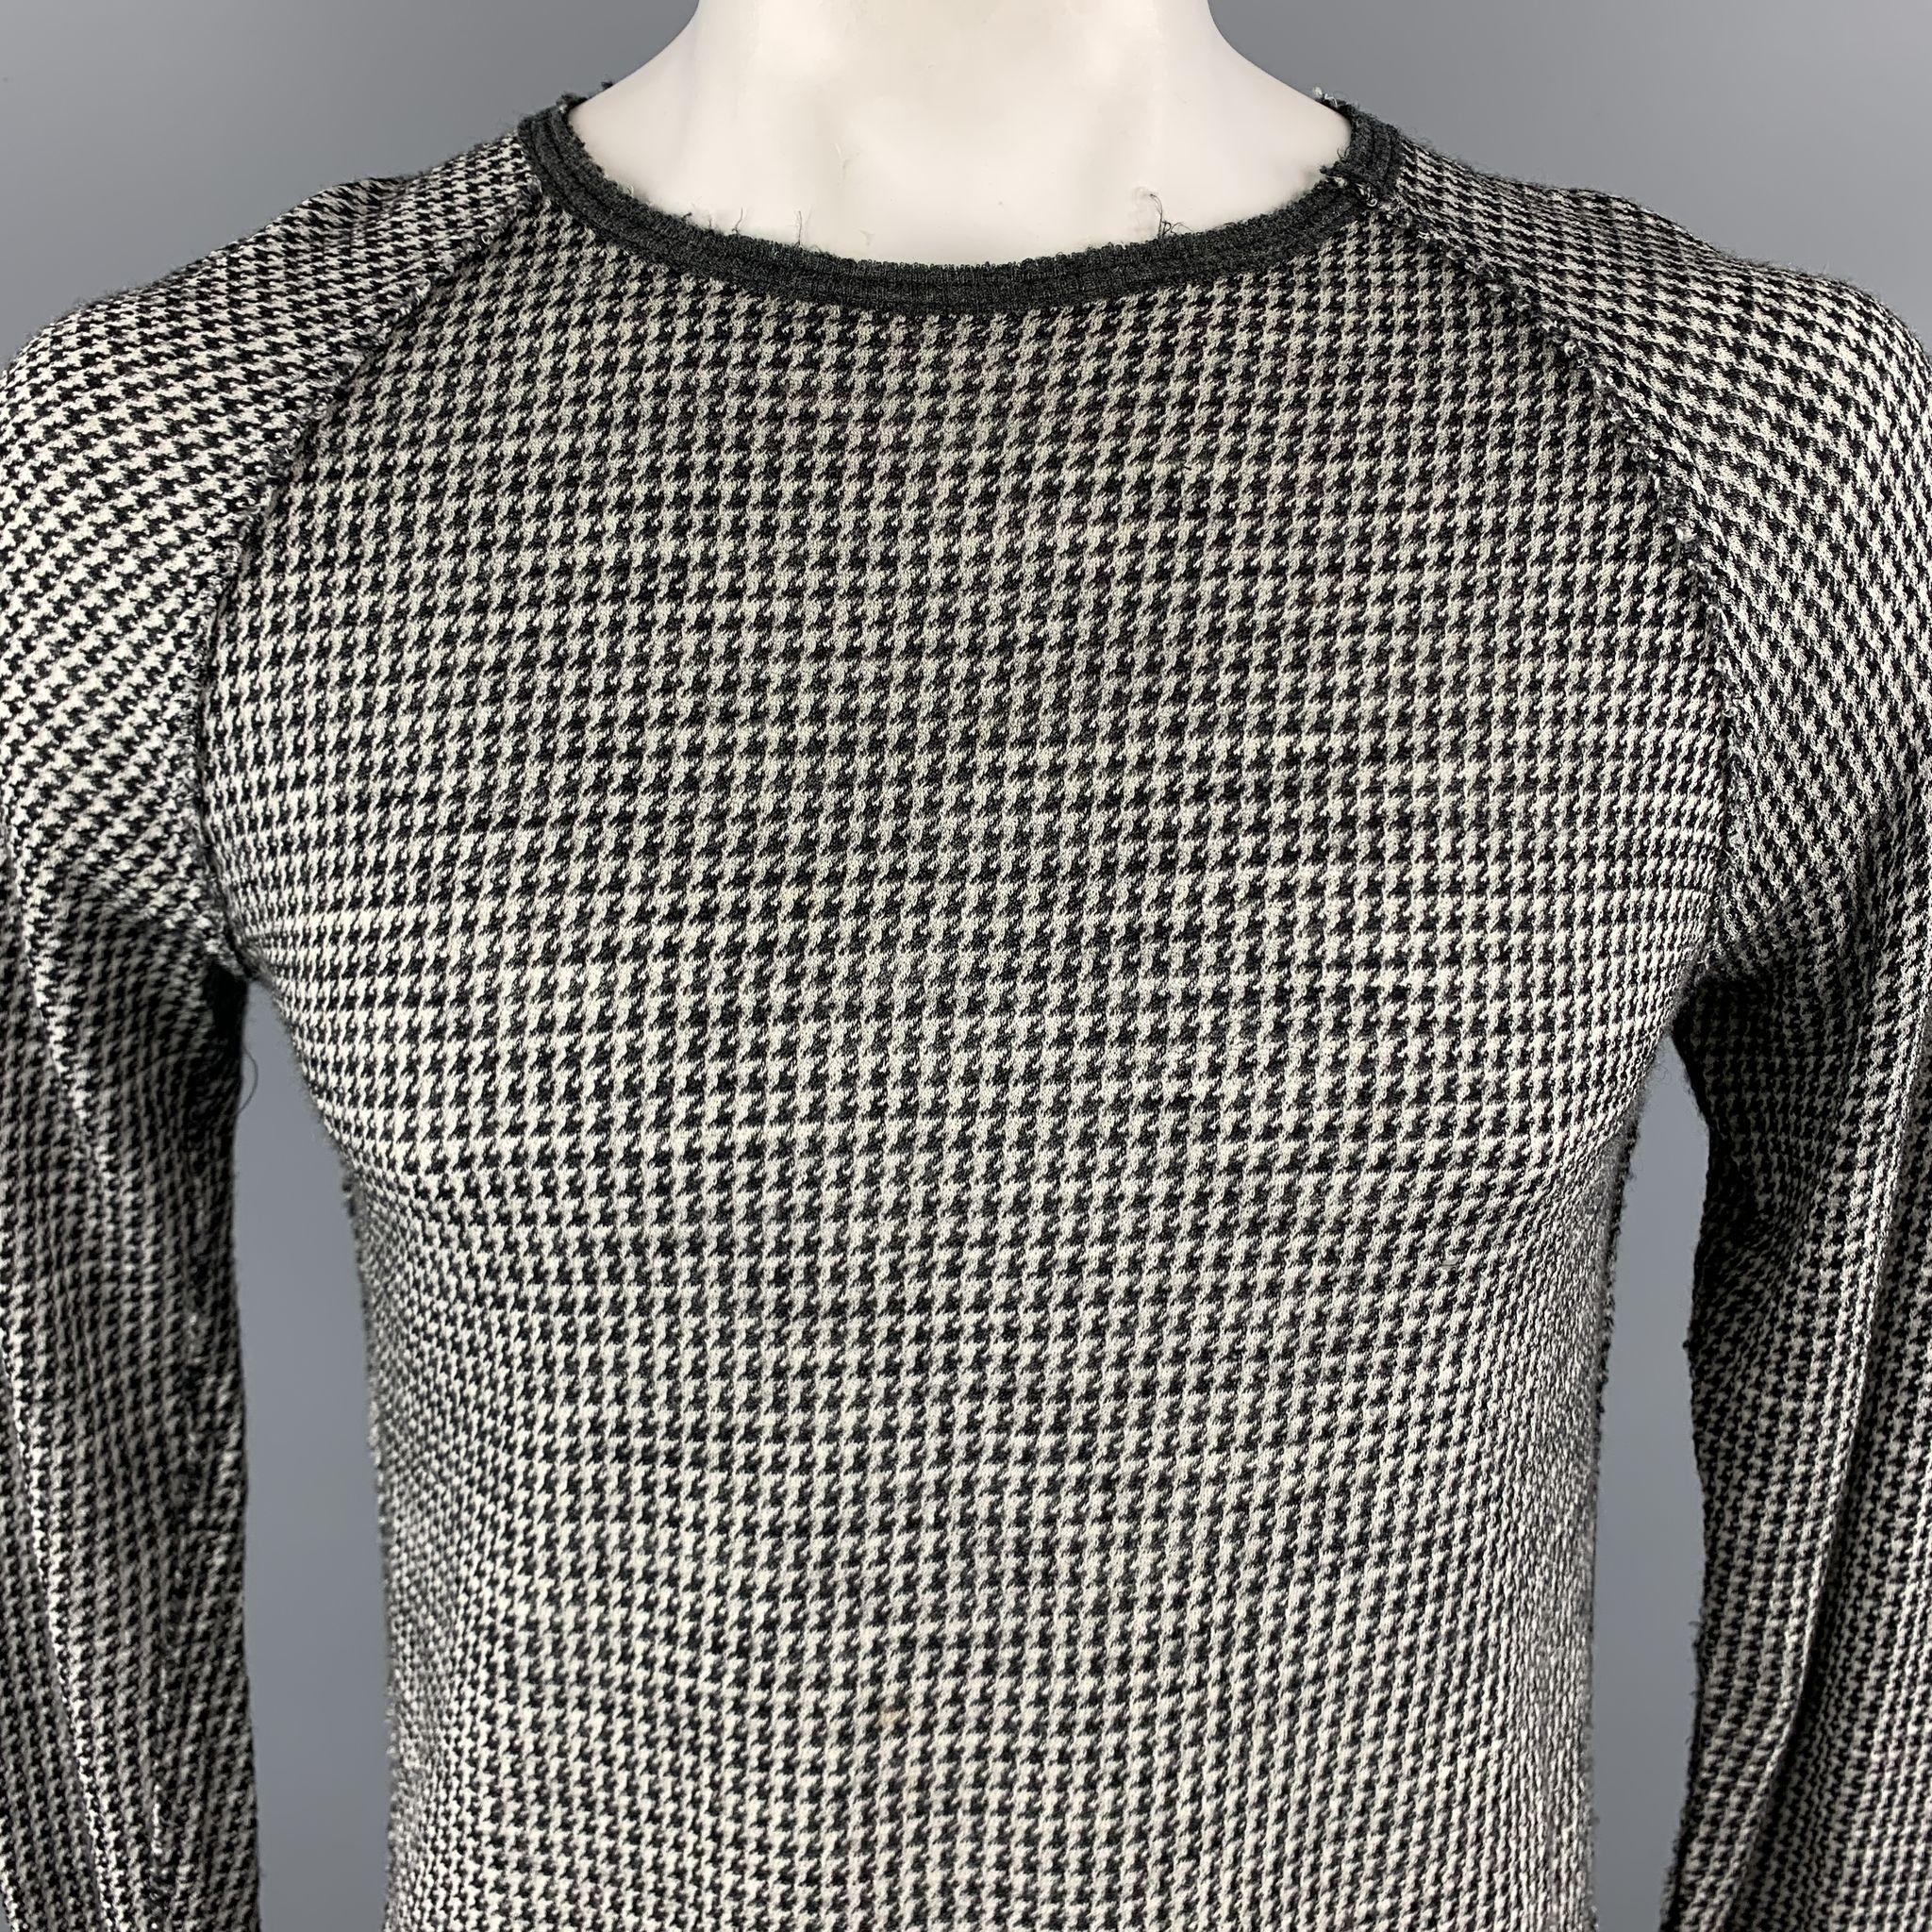 V::ROOM Pullover Sweater comes in black and grey tones in a houndstooth wool material, with a crewneck, raglan sleeves and raw hem. As is, with a small hole at front. Made in Japan.

Good Pre-Owned Condition.
Marked: L

Measurements:

Shoulder: 17.5